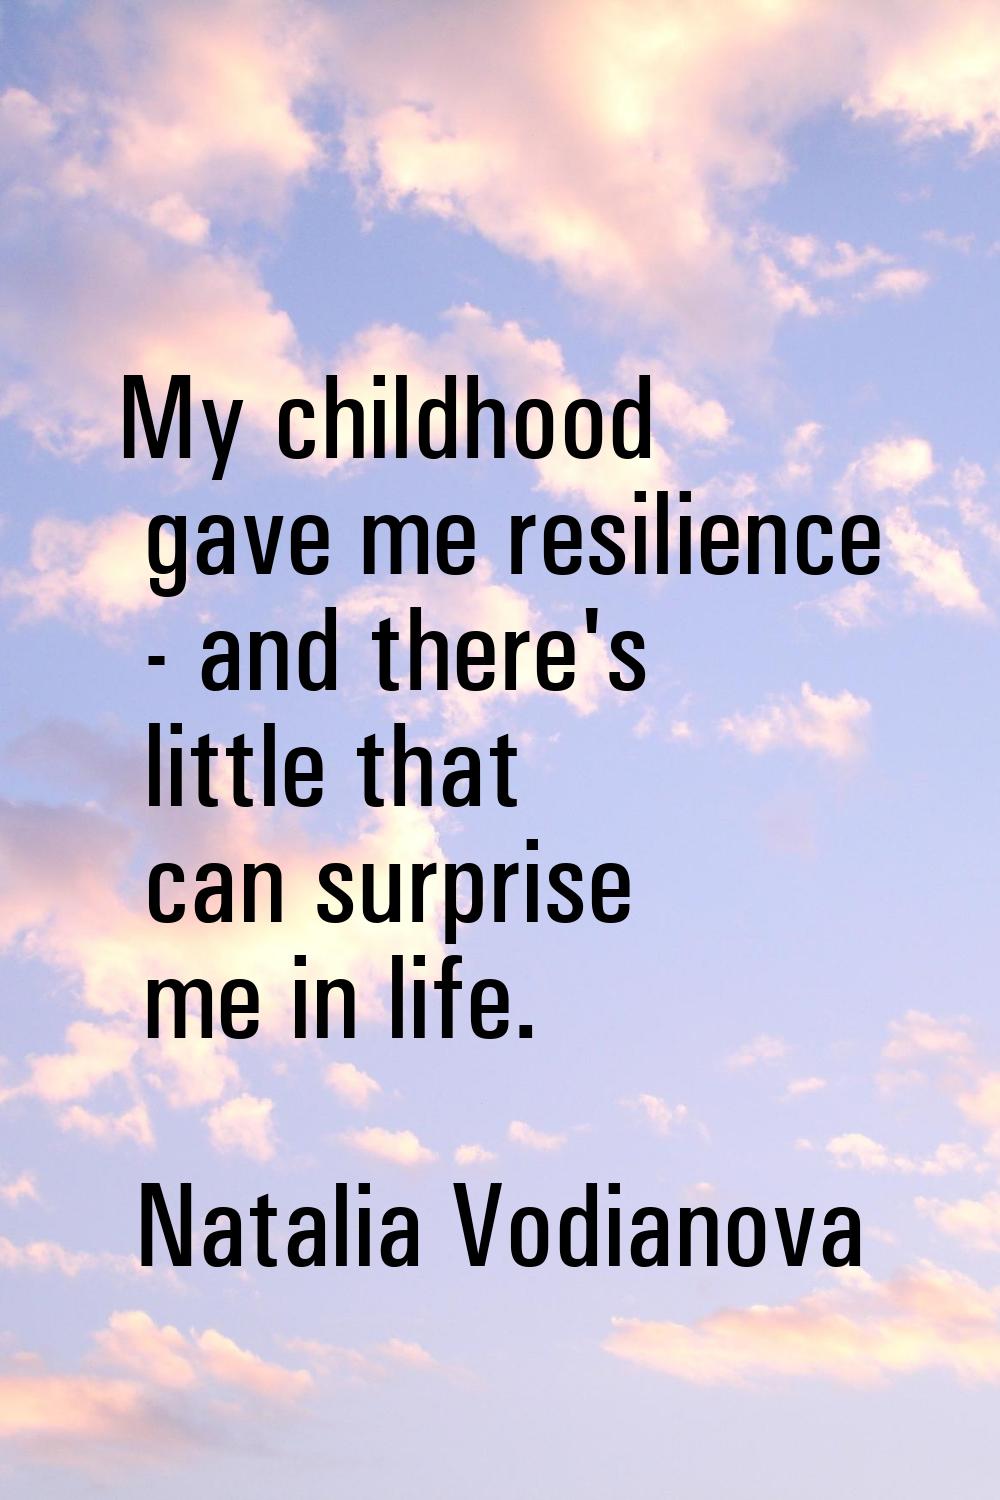 My childhood gave me resilience - and there's little that can surprise me in life.